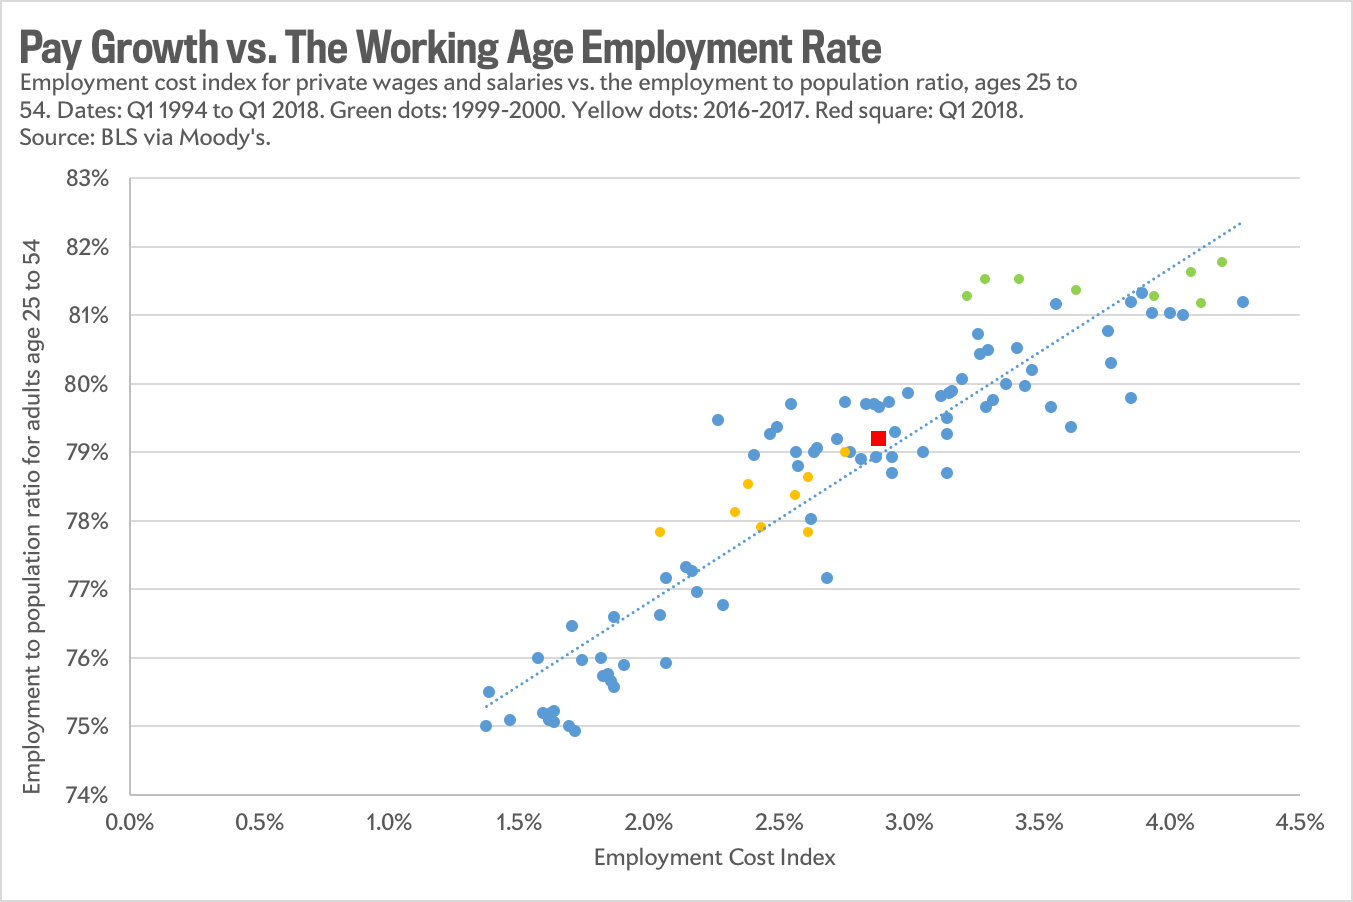 Working-age employment rate vs. pay